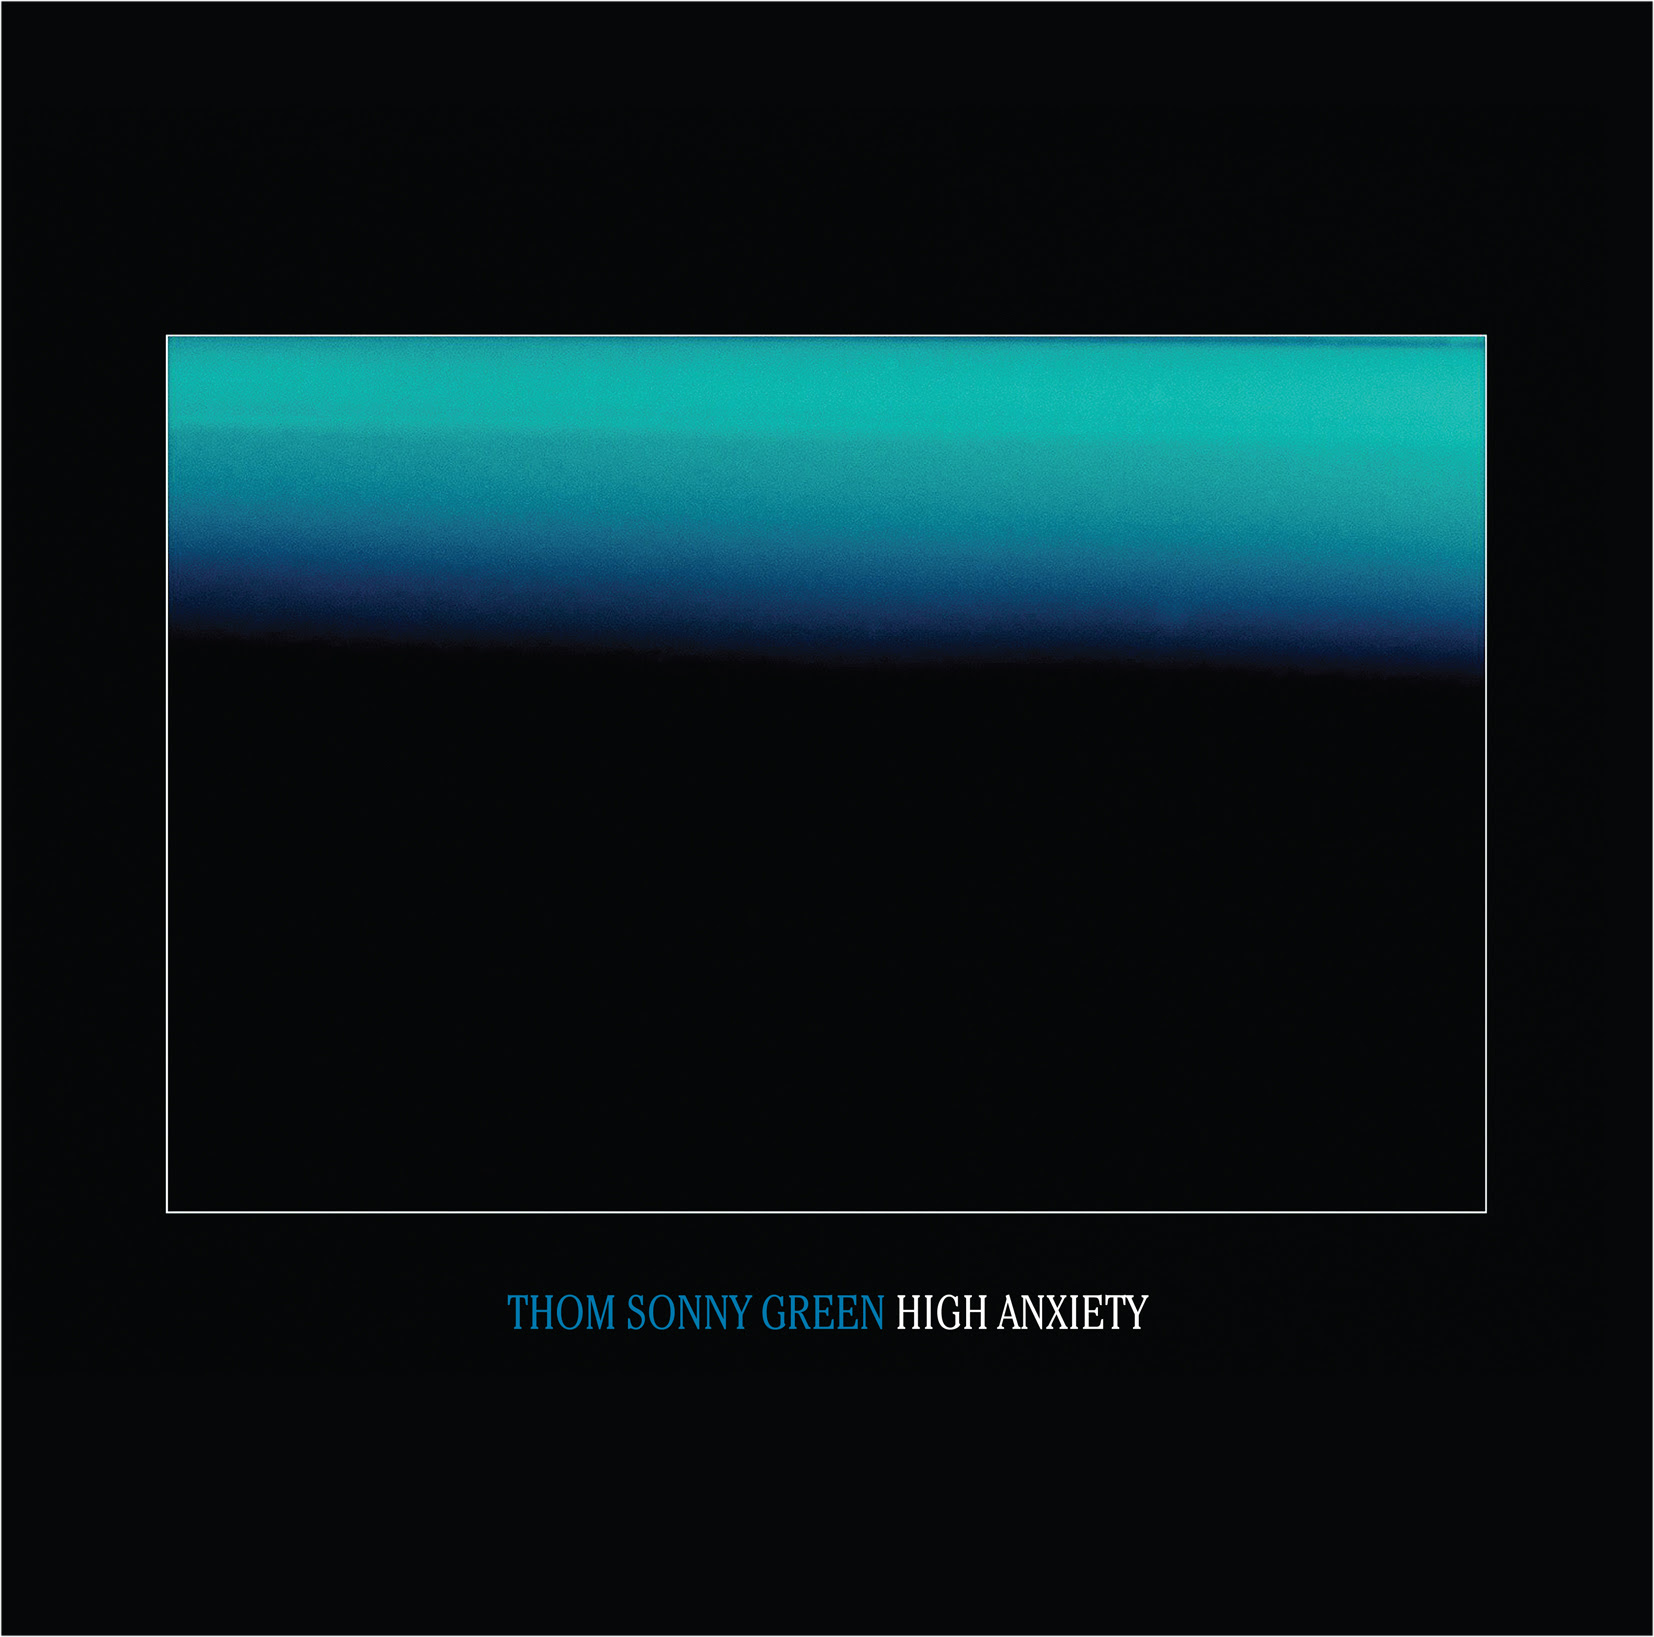 Thom Sonny Green (alt-J) shares new track "Phoenix" from his debut solo LP 'High Anxiety'